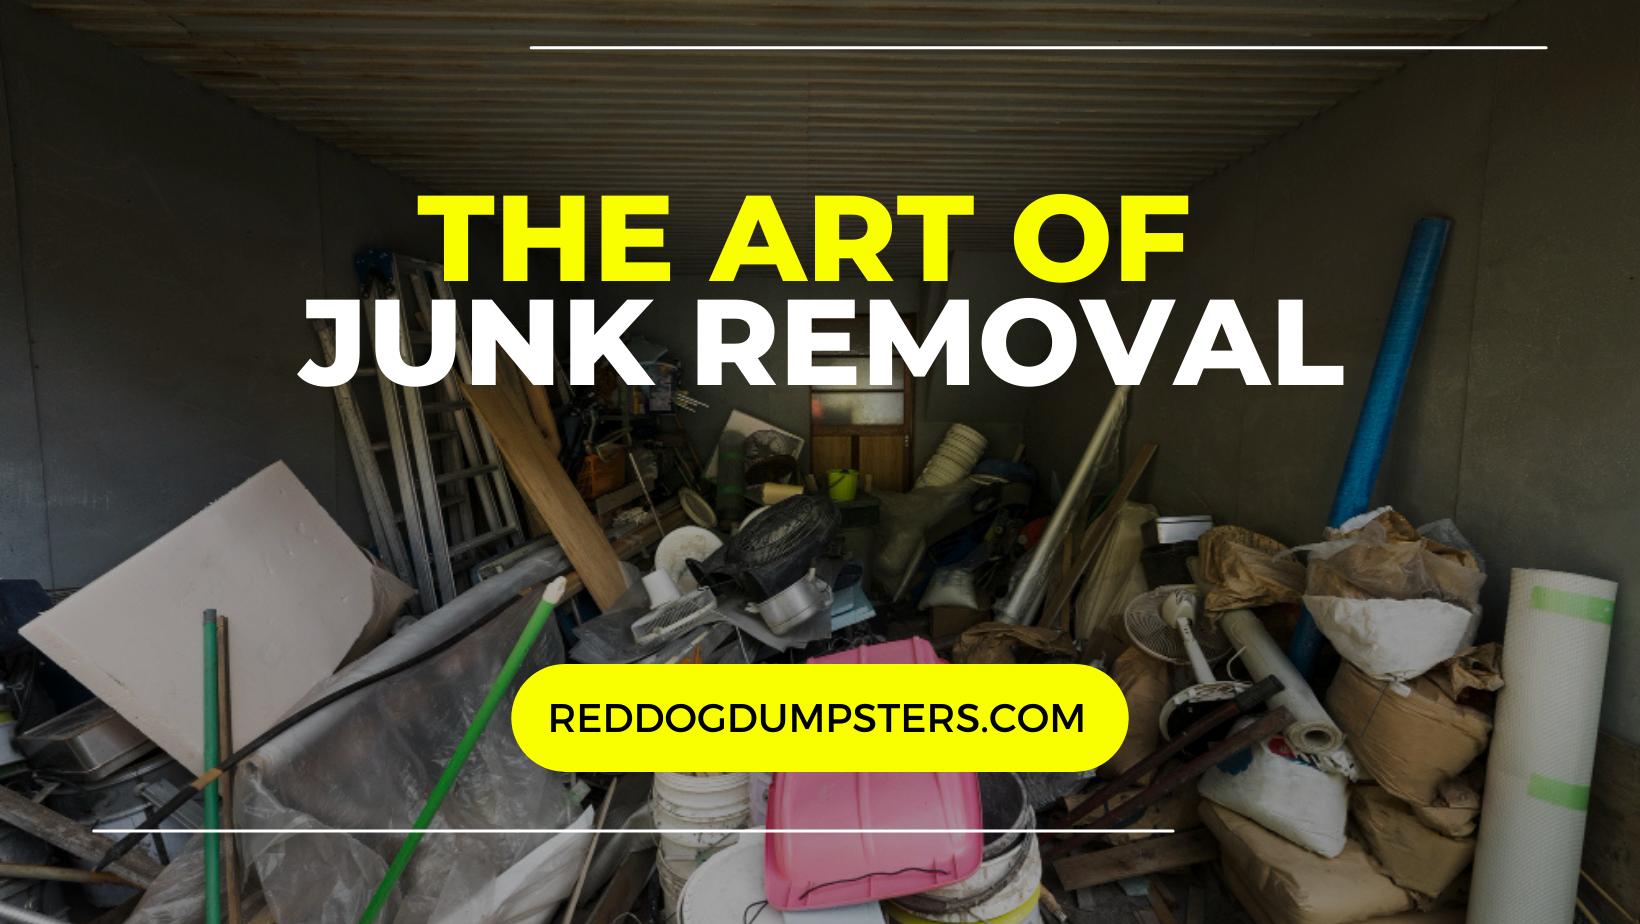 The Art of Junk Removal